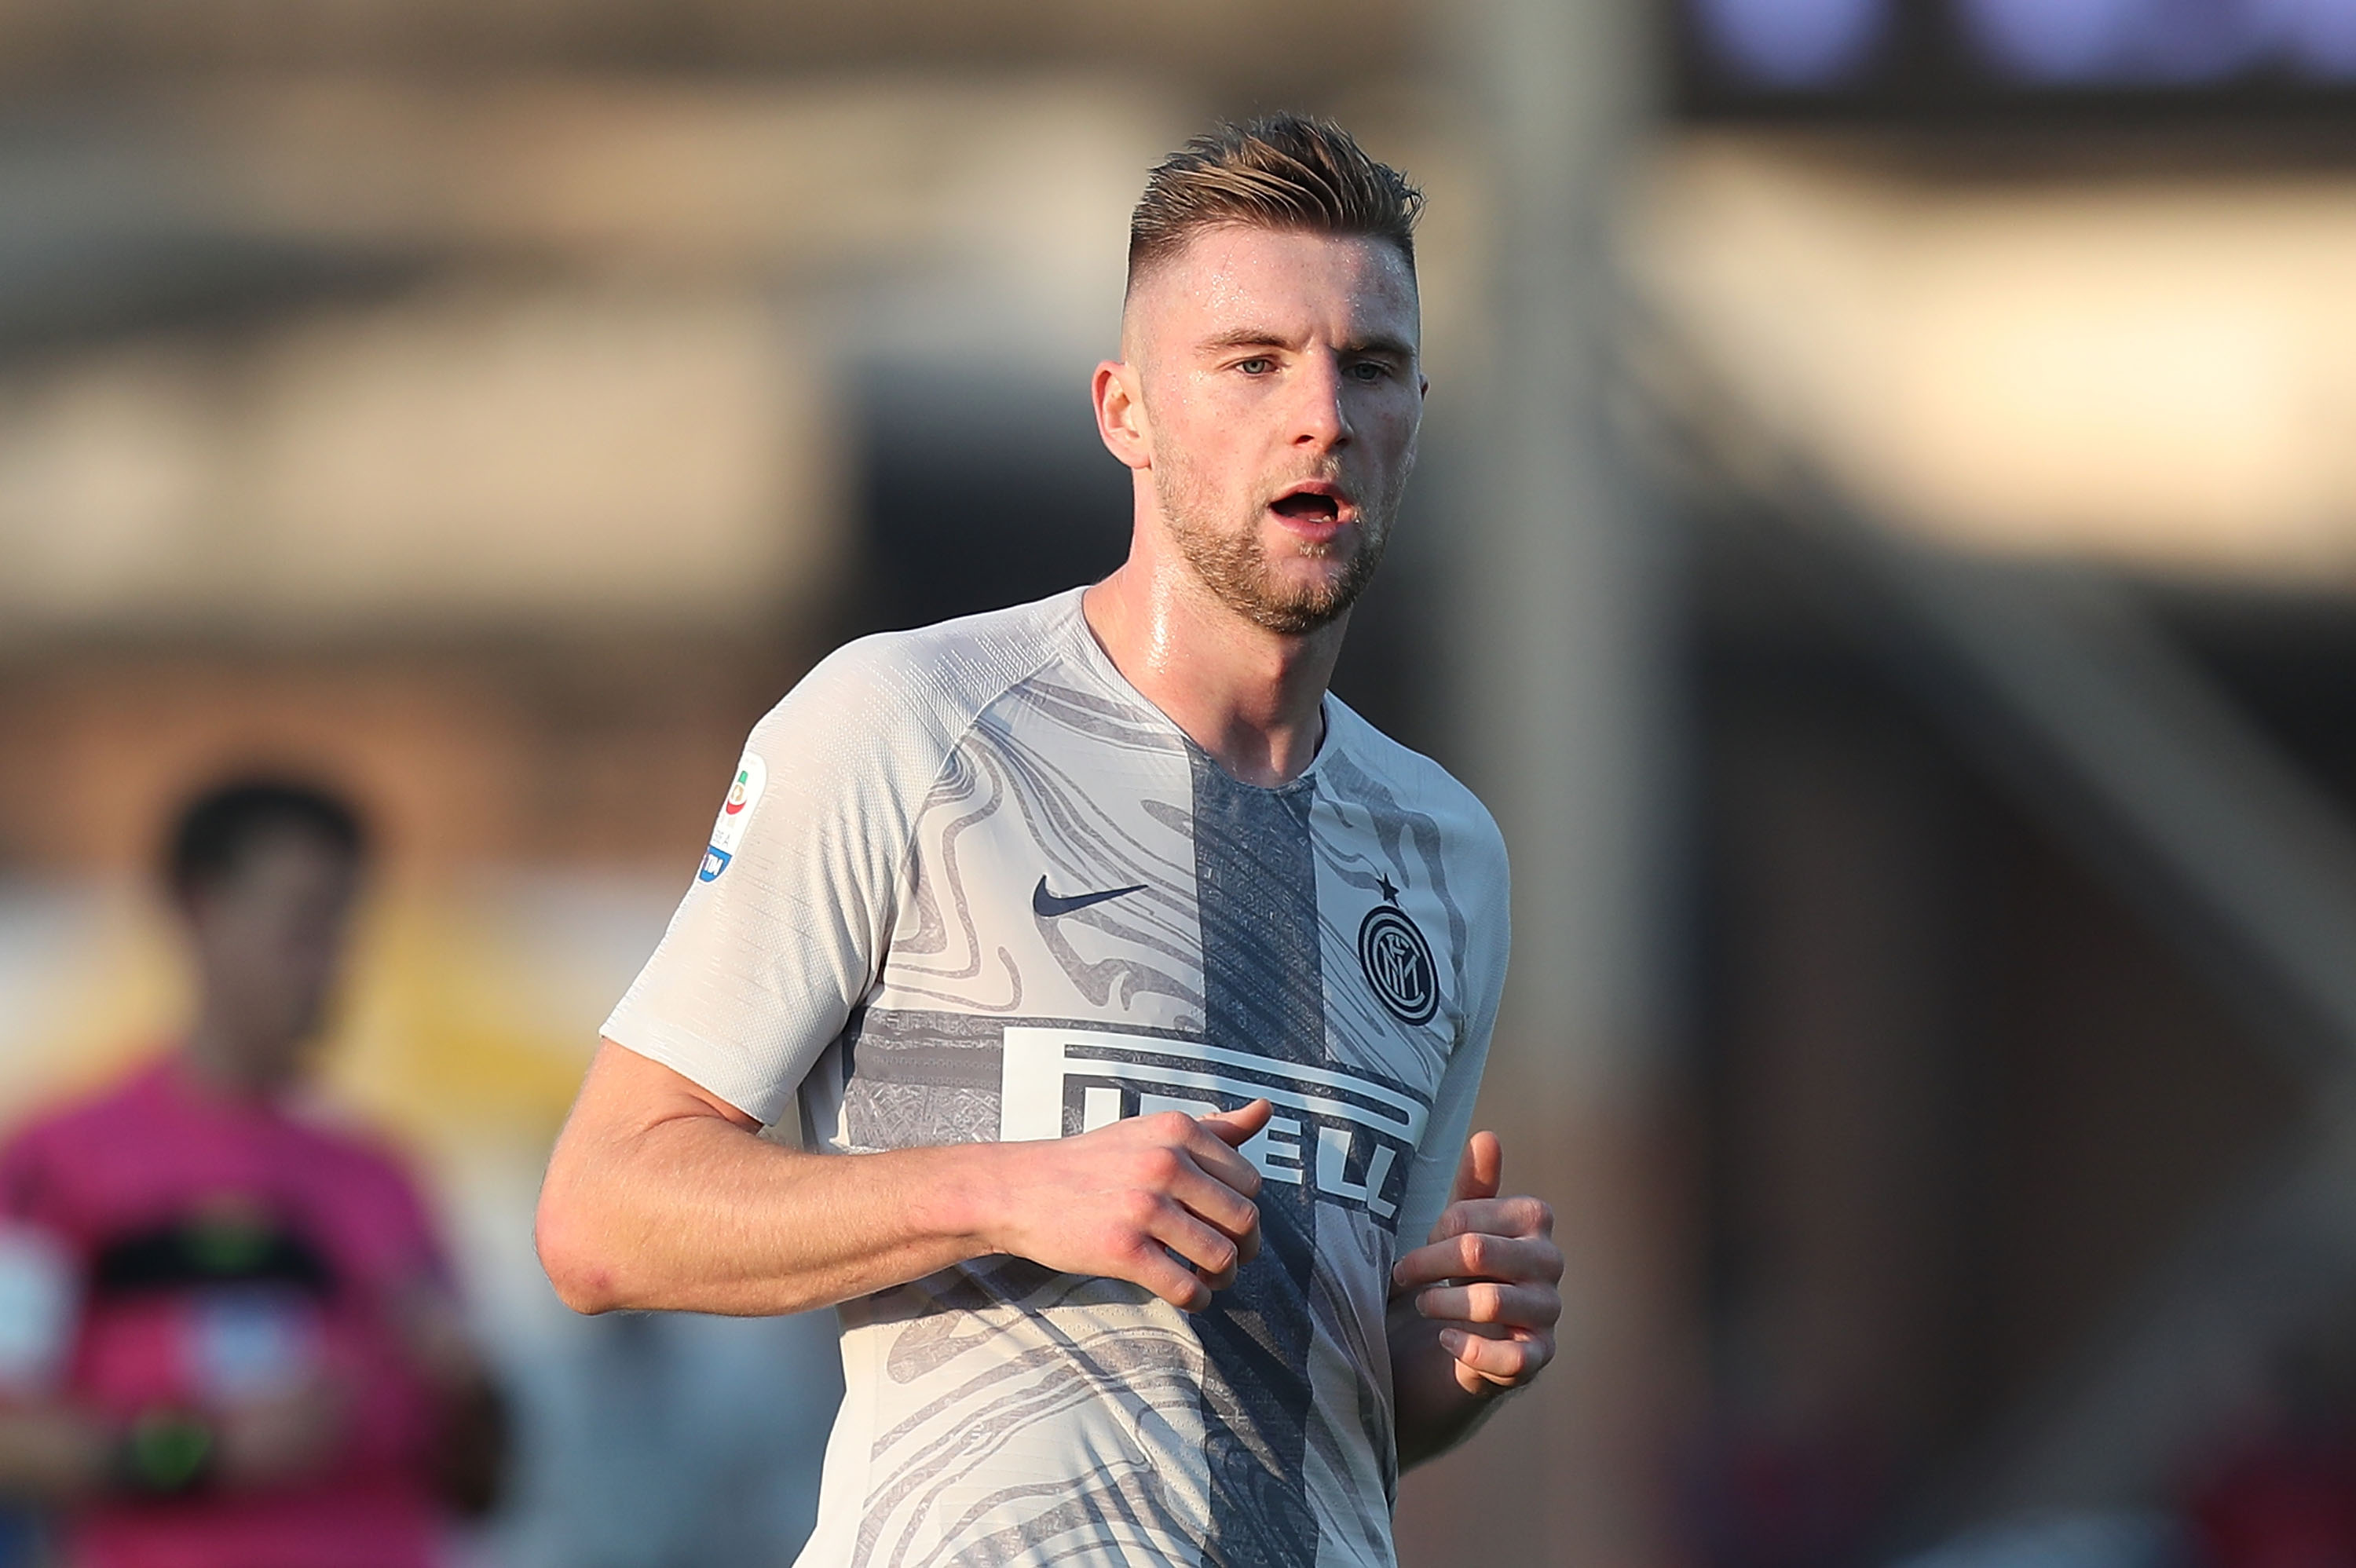 After a starring season with Inter, can Skriniar repeat the heroics for Slovakia? (Photo by Gabriele Maltinti/Getty Images)